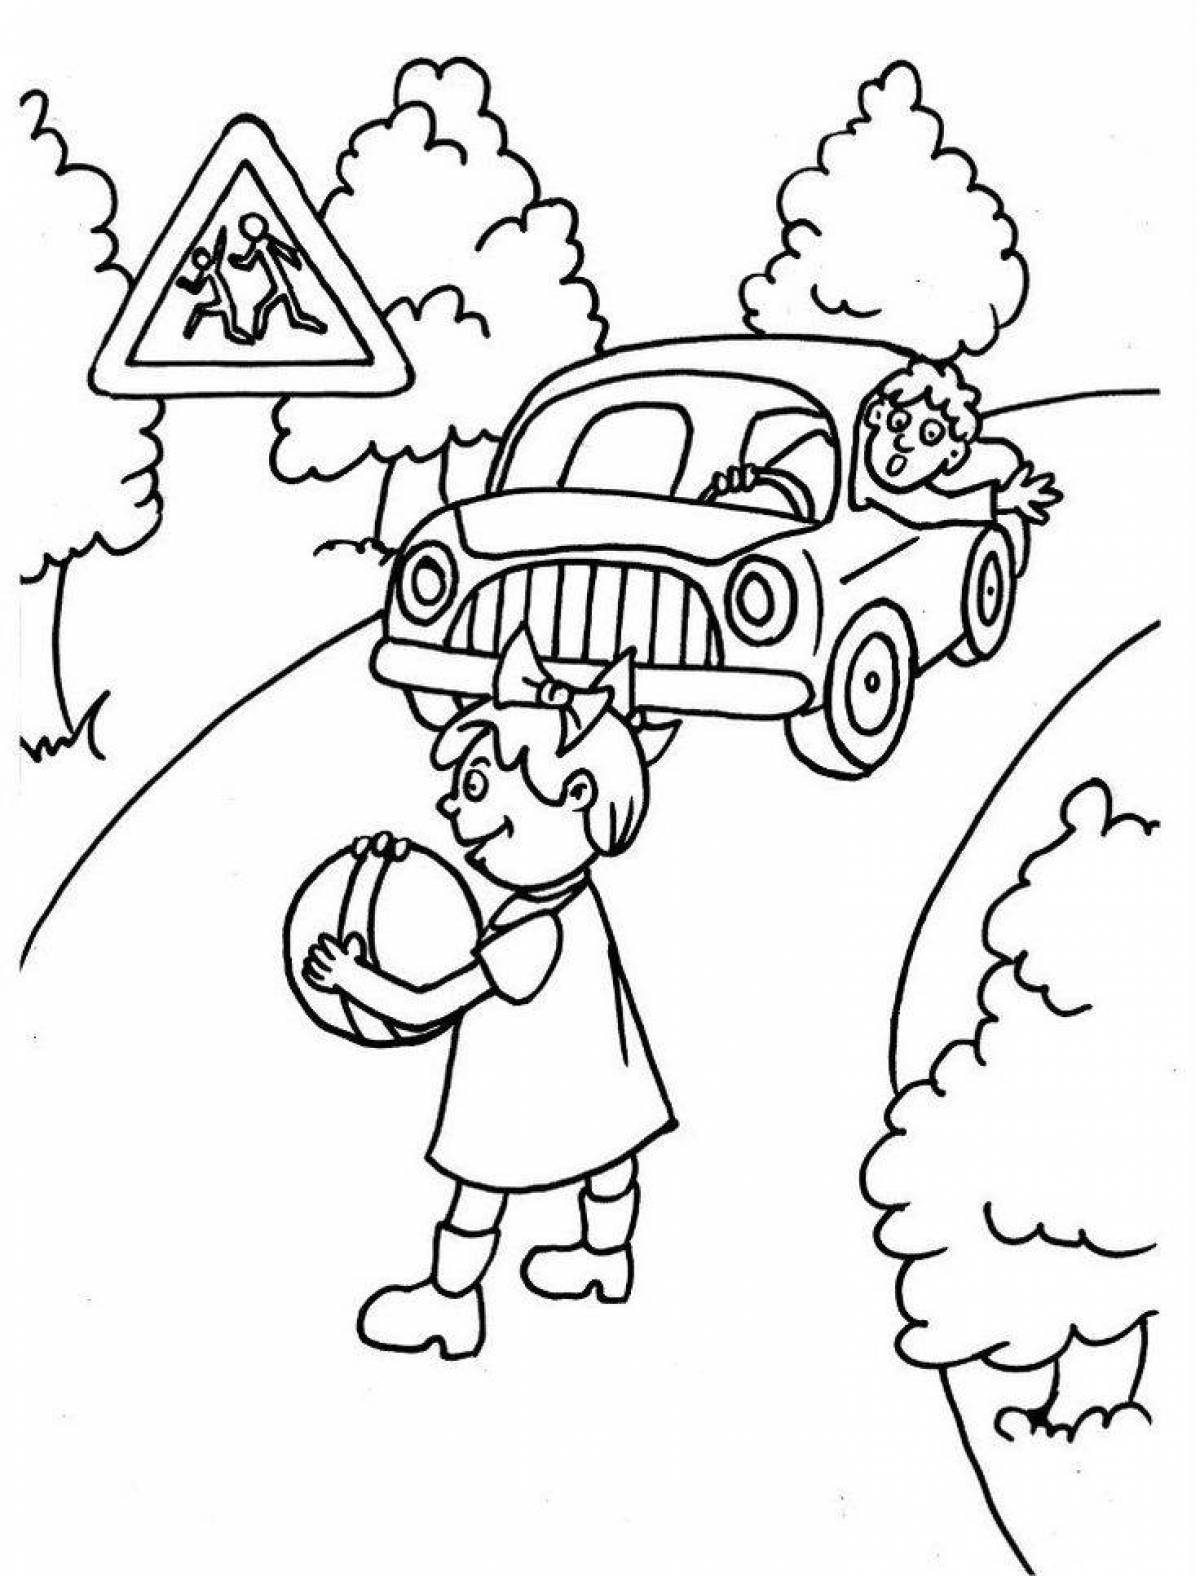 Funny traffic rules coloring book for schoolchildren